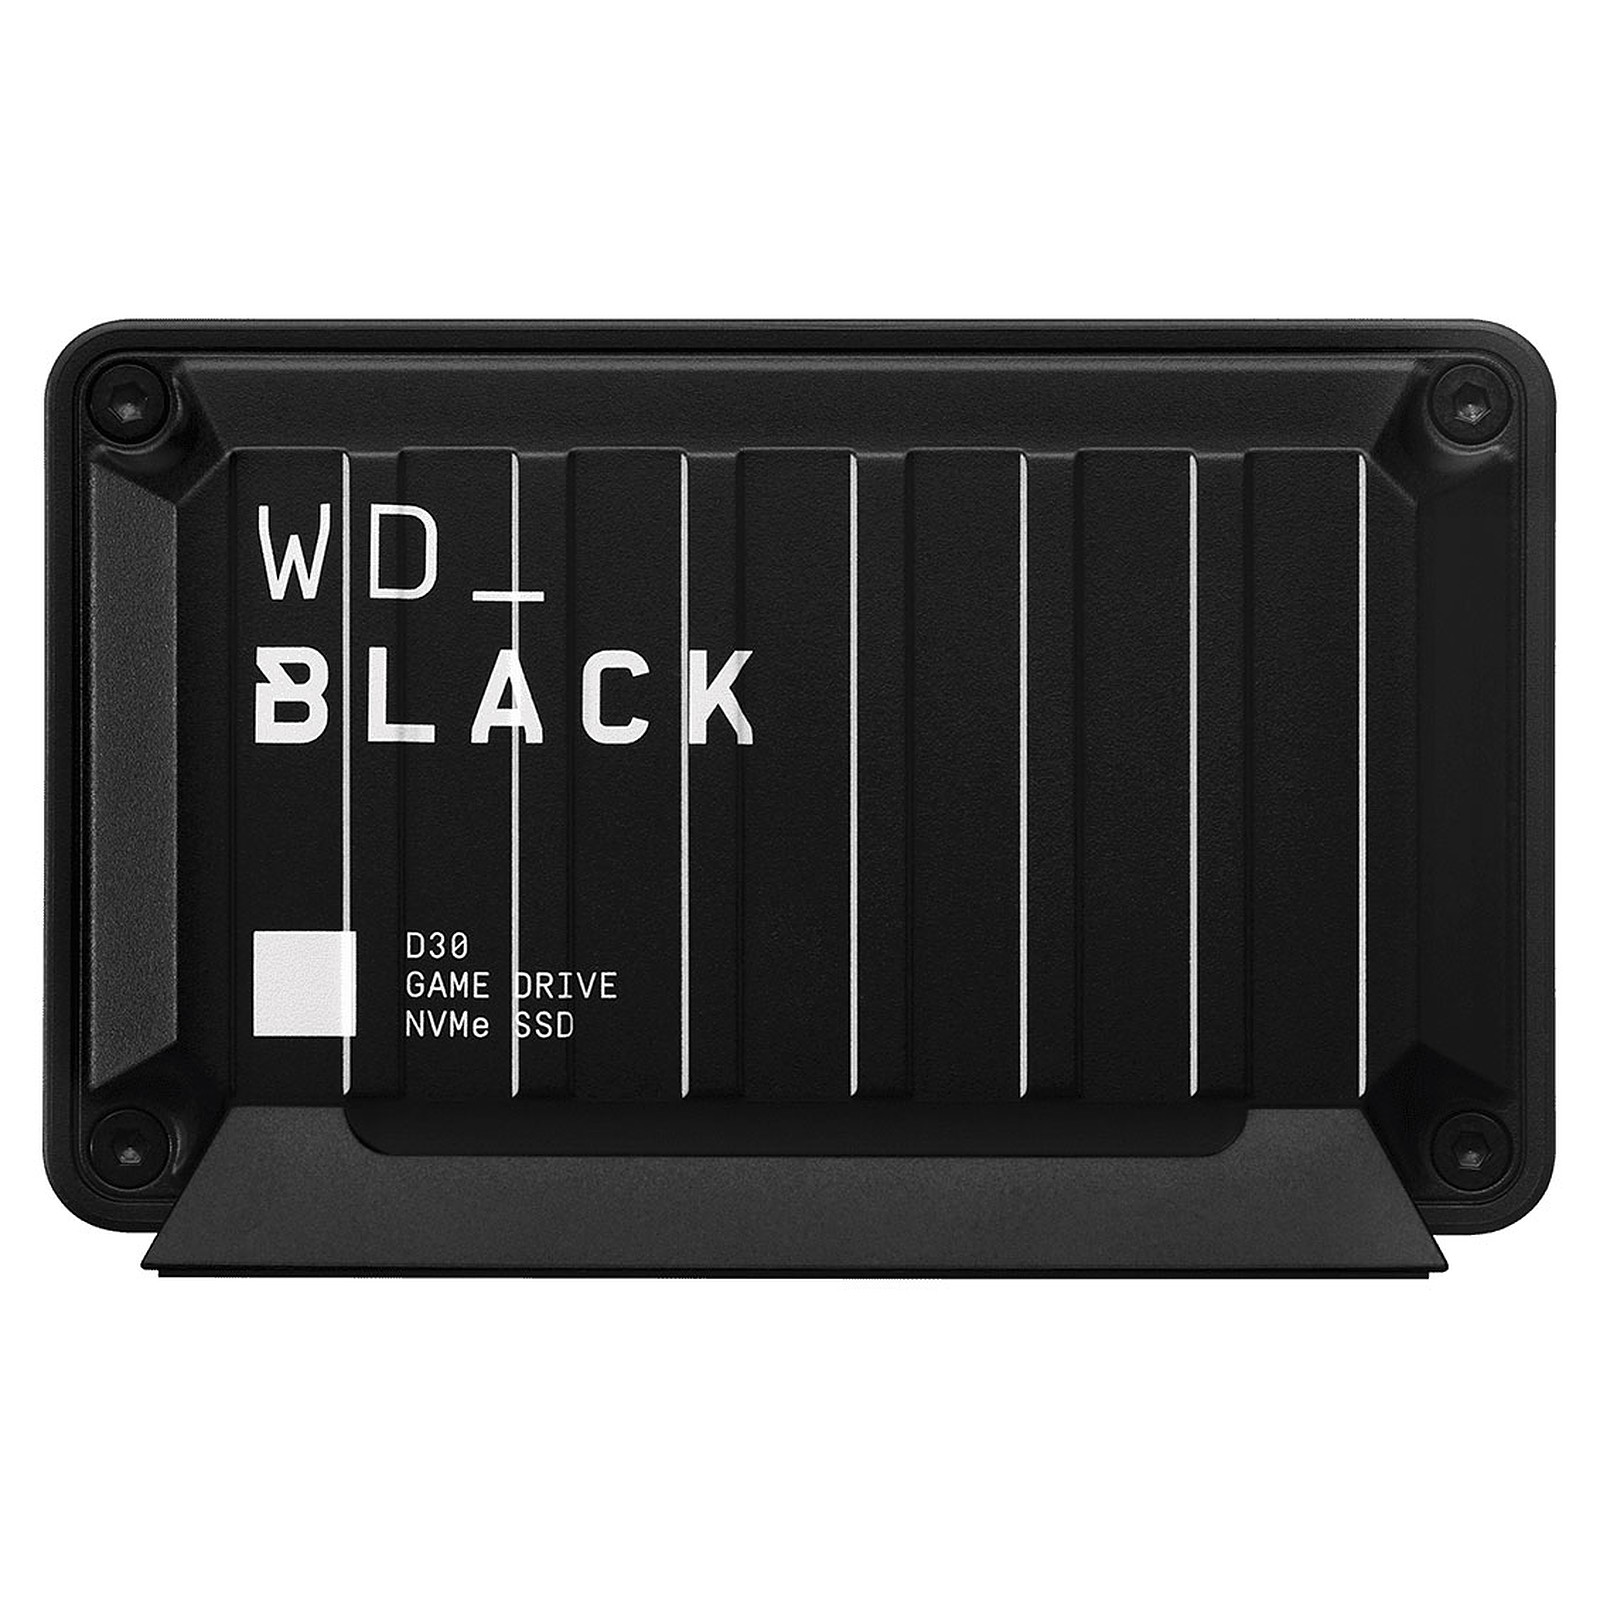 WD_Black D30 Game Drive SSD 2 To - Disque dur externe WD_Black